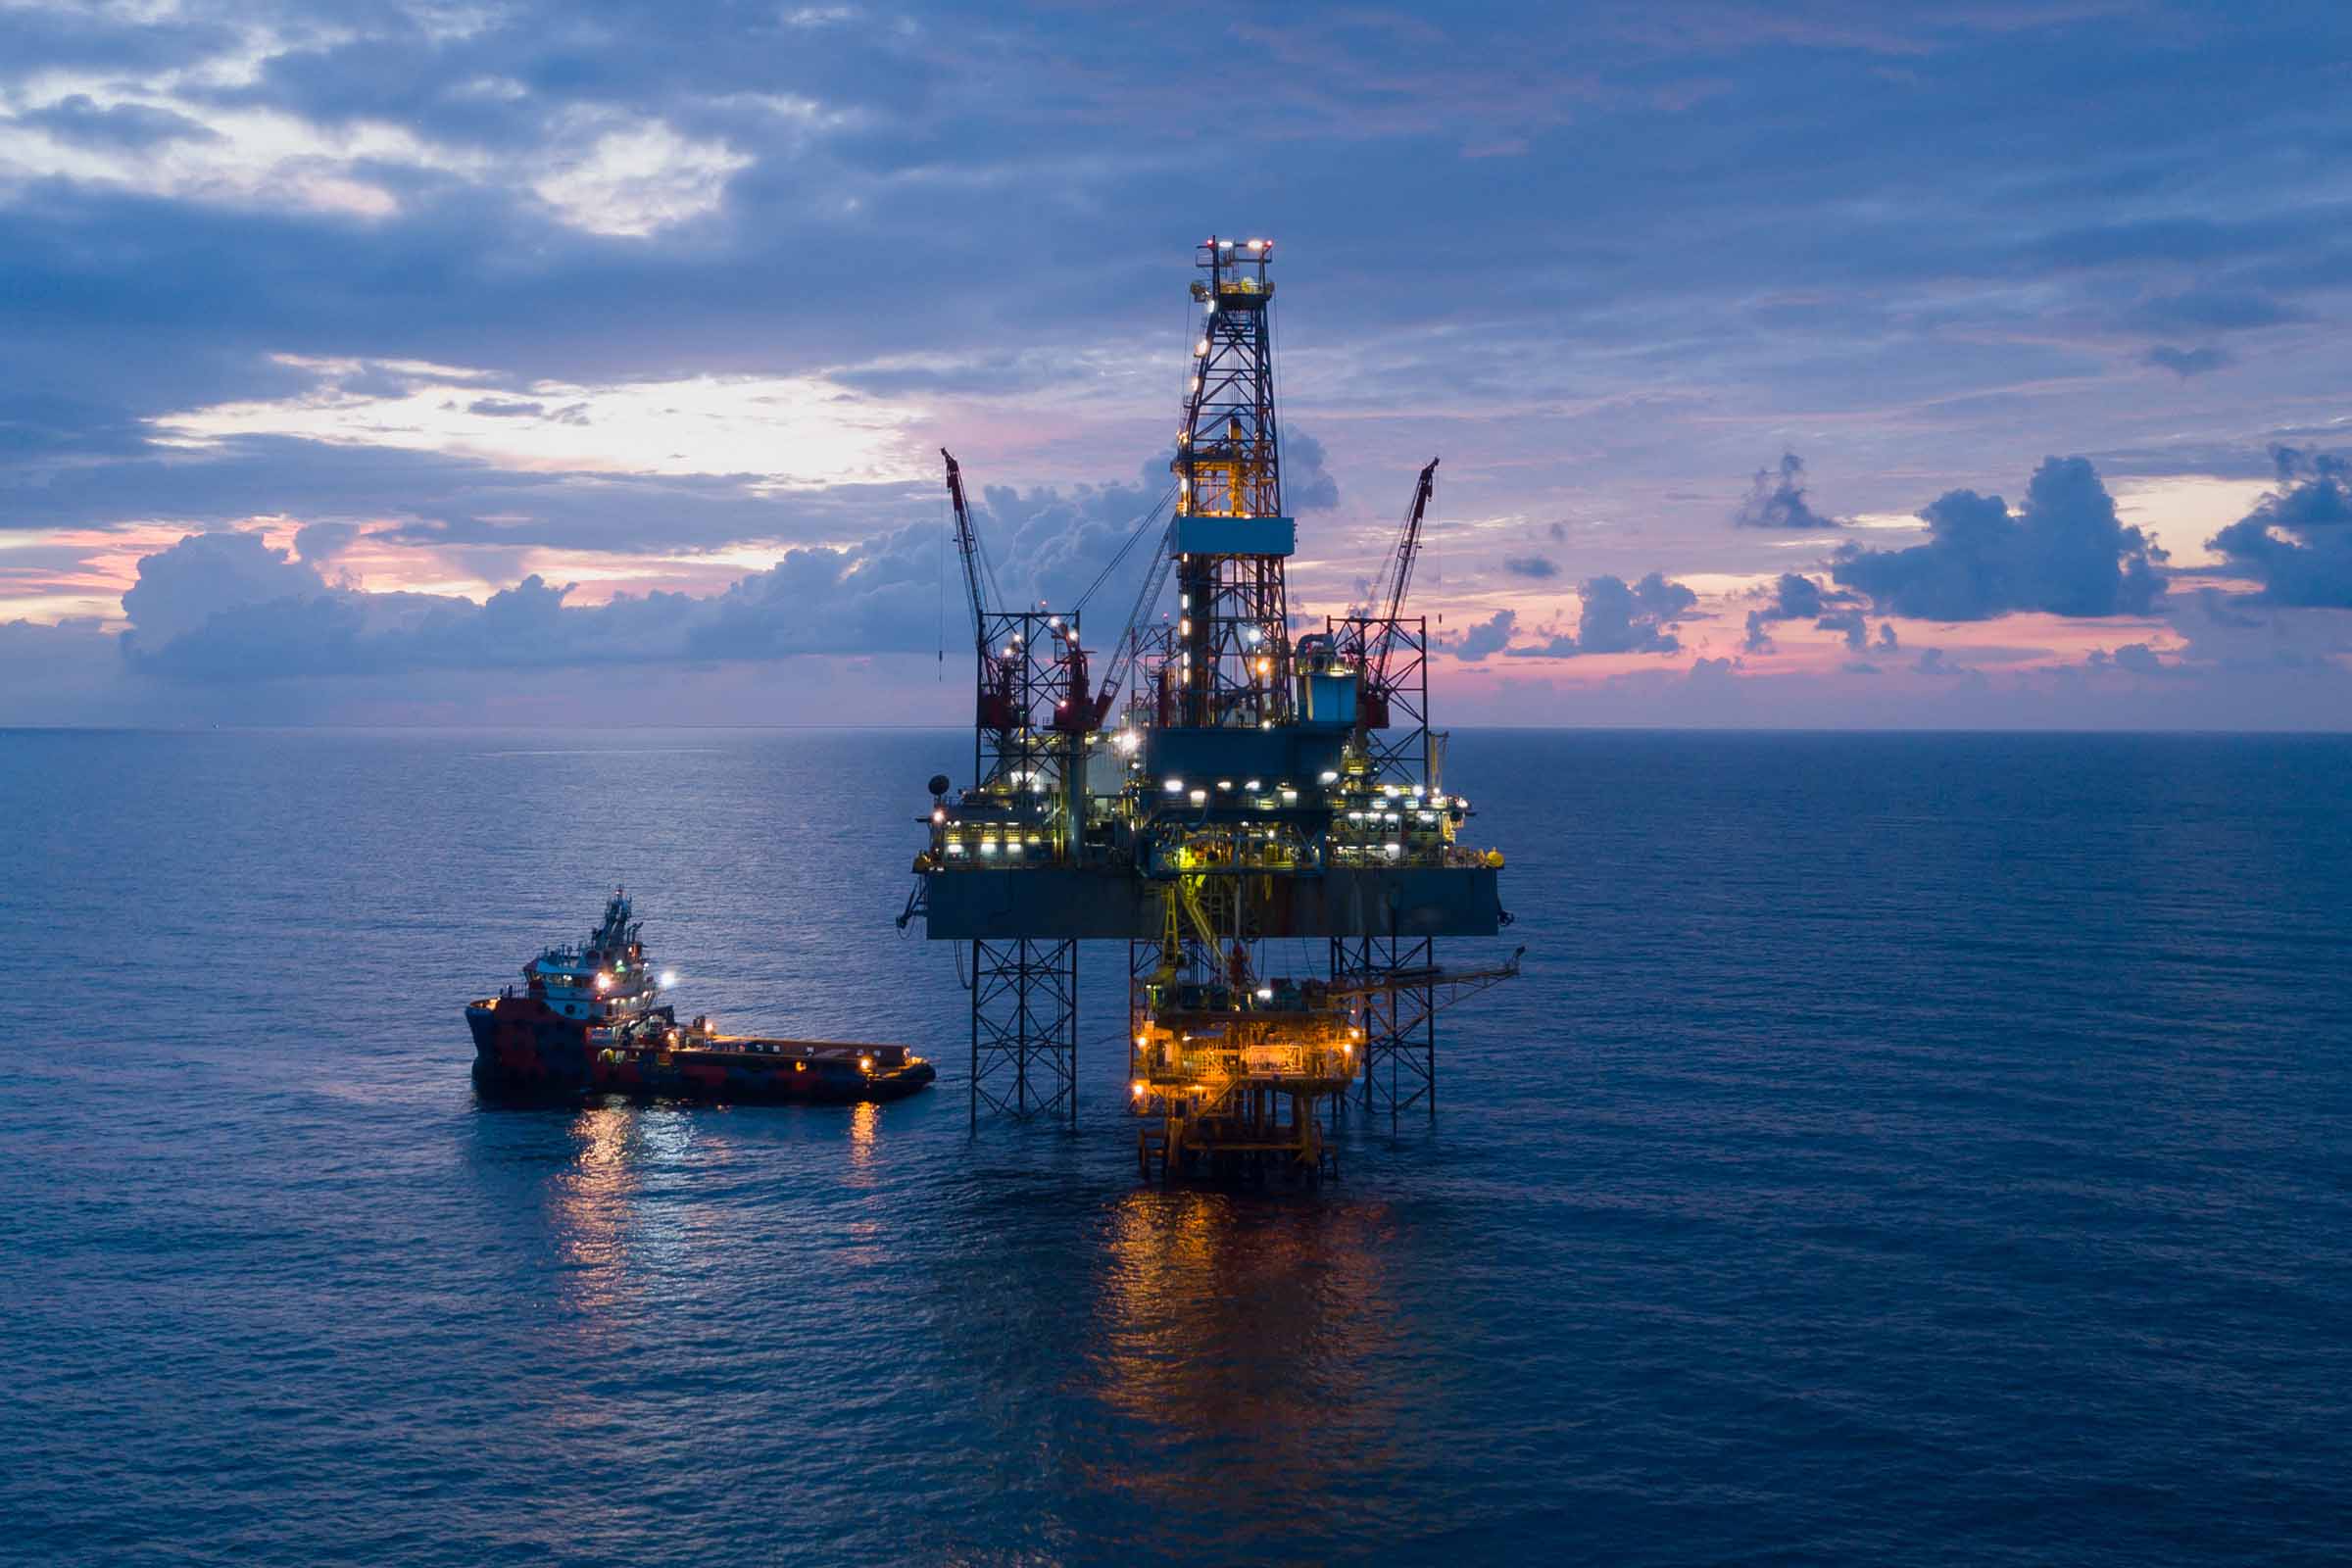 APAC doubles down on offshore rig backlog